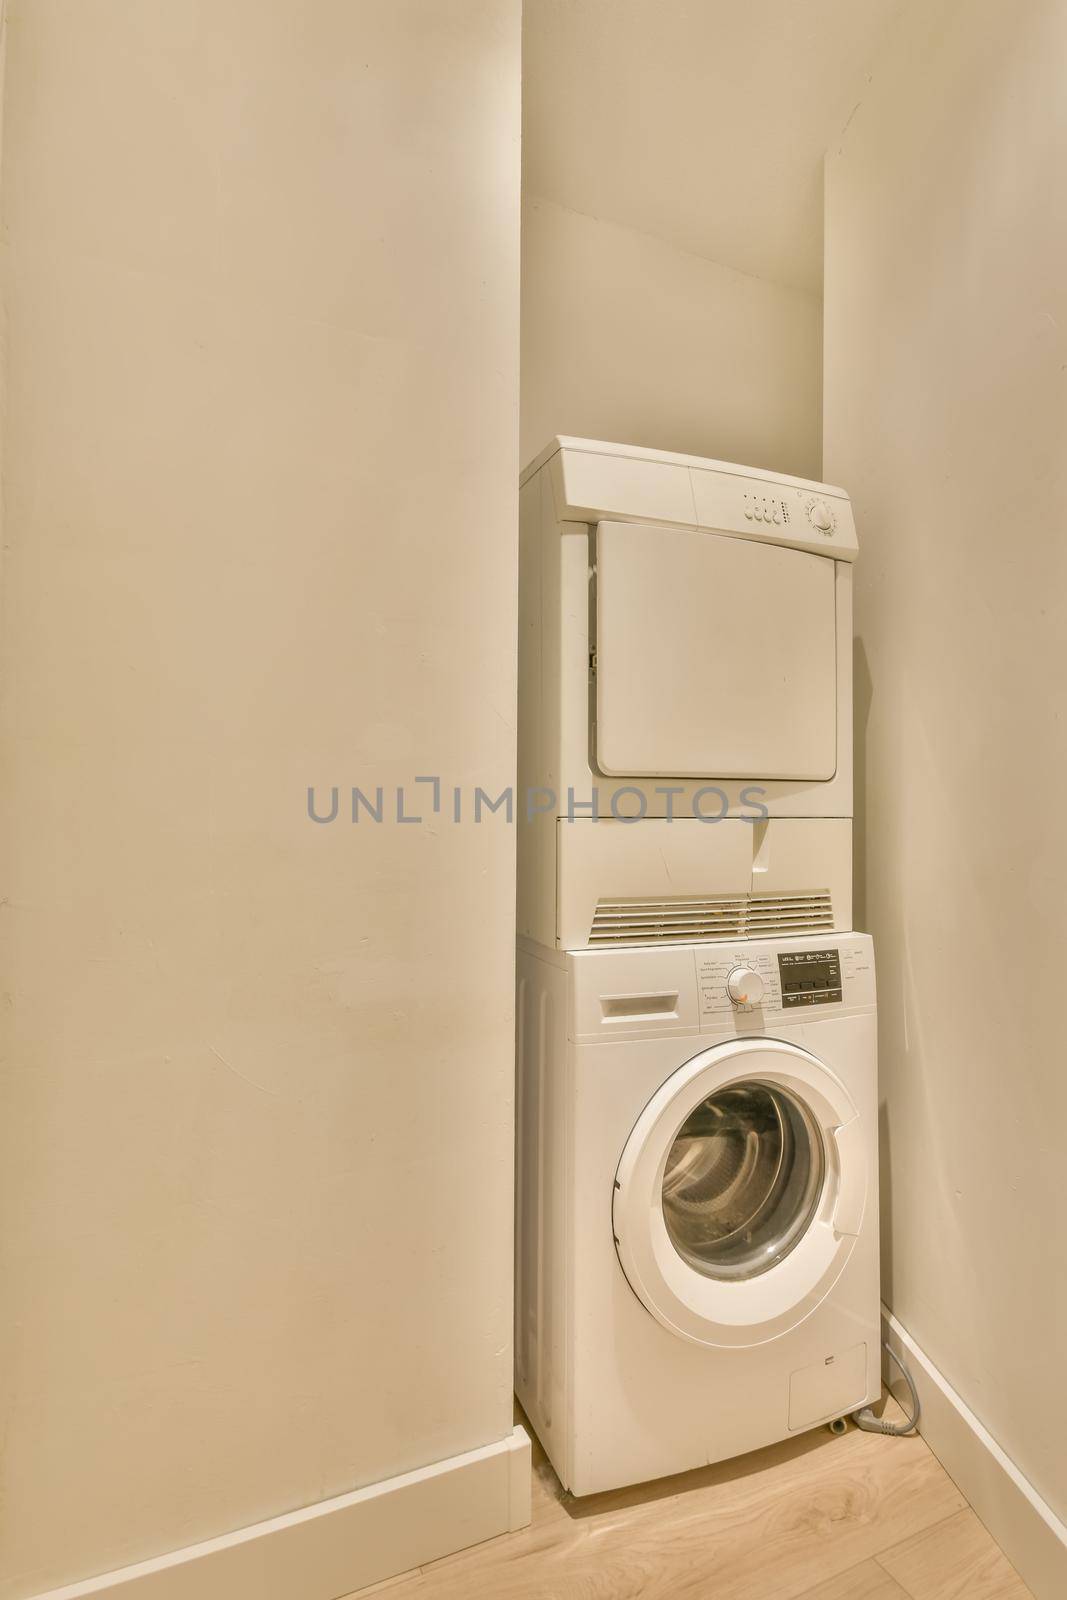 Laundry interior design in a luxury house